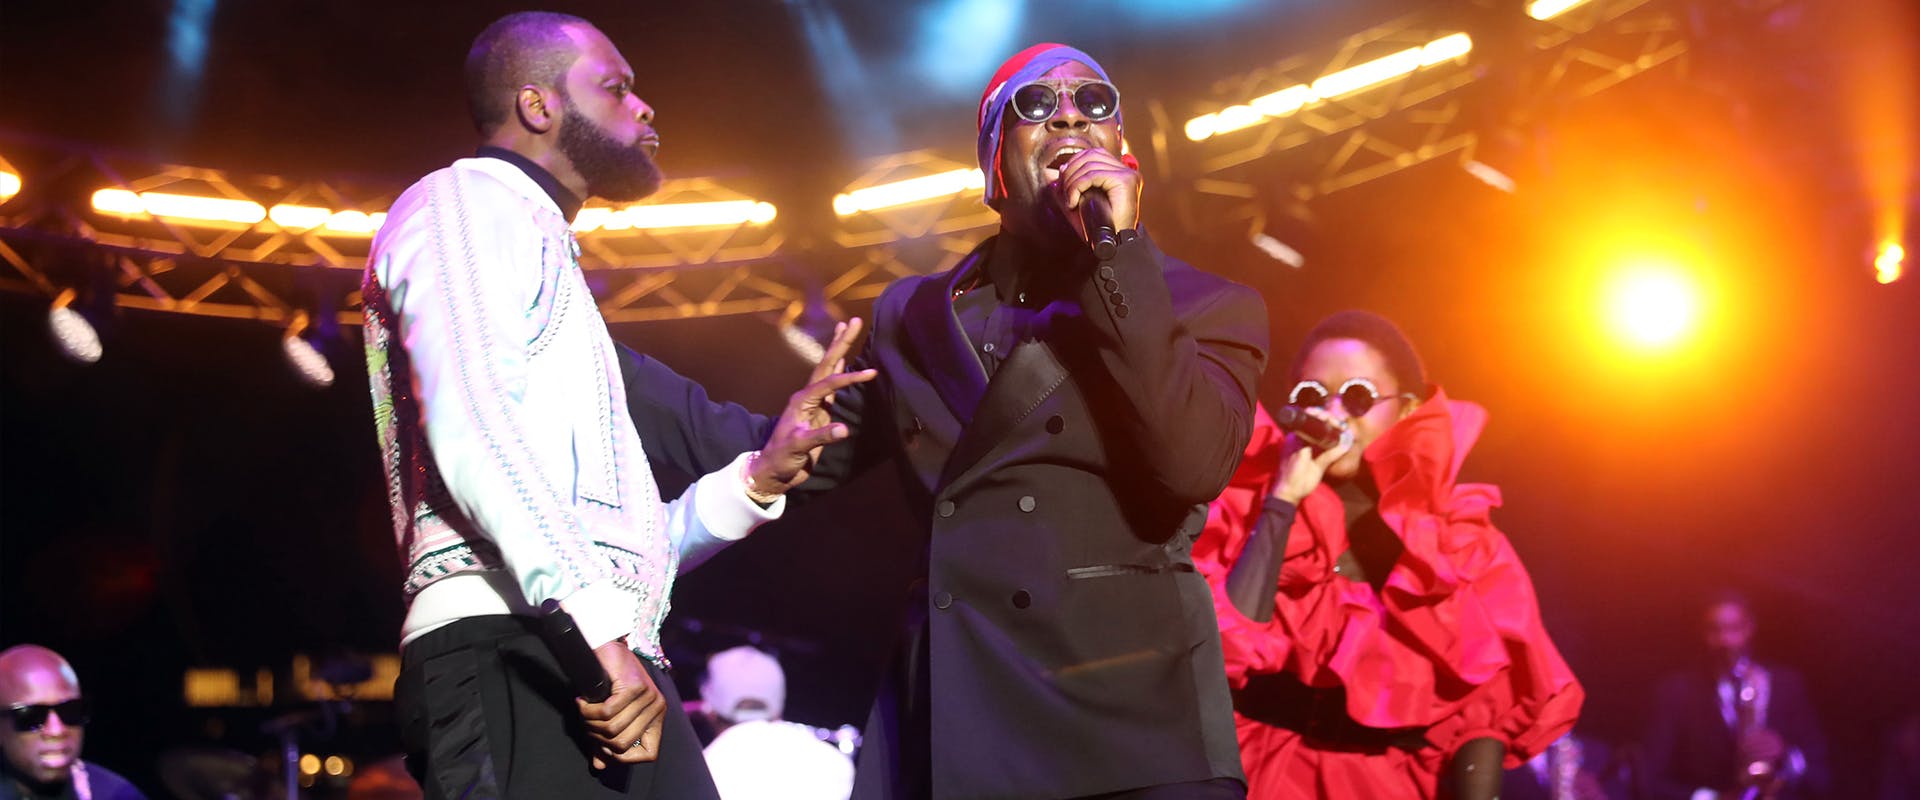 Pras, Wyclef Jean and Lauryn Hill of The Fugees perform at Global Citizen Live at Pier 17 on September 22, 2021 in New York City.